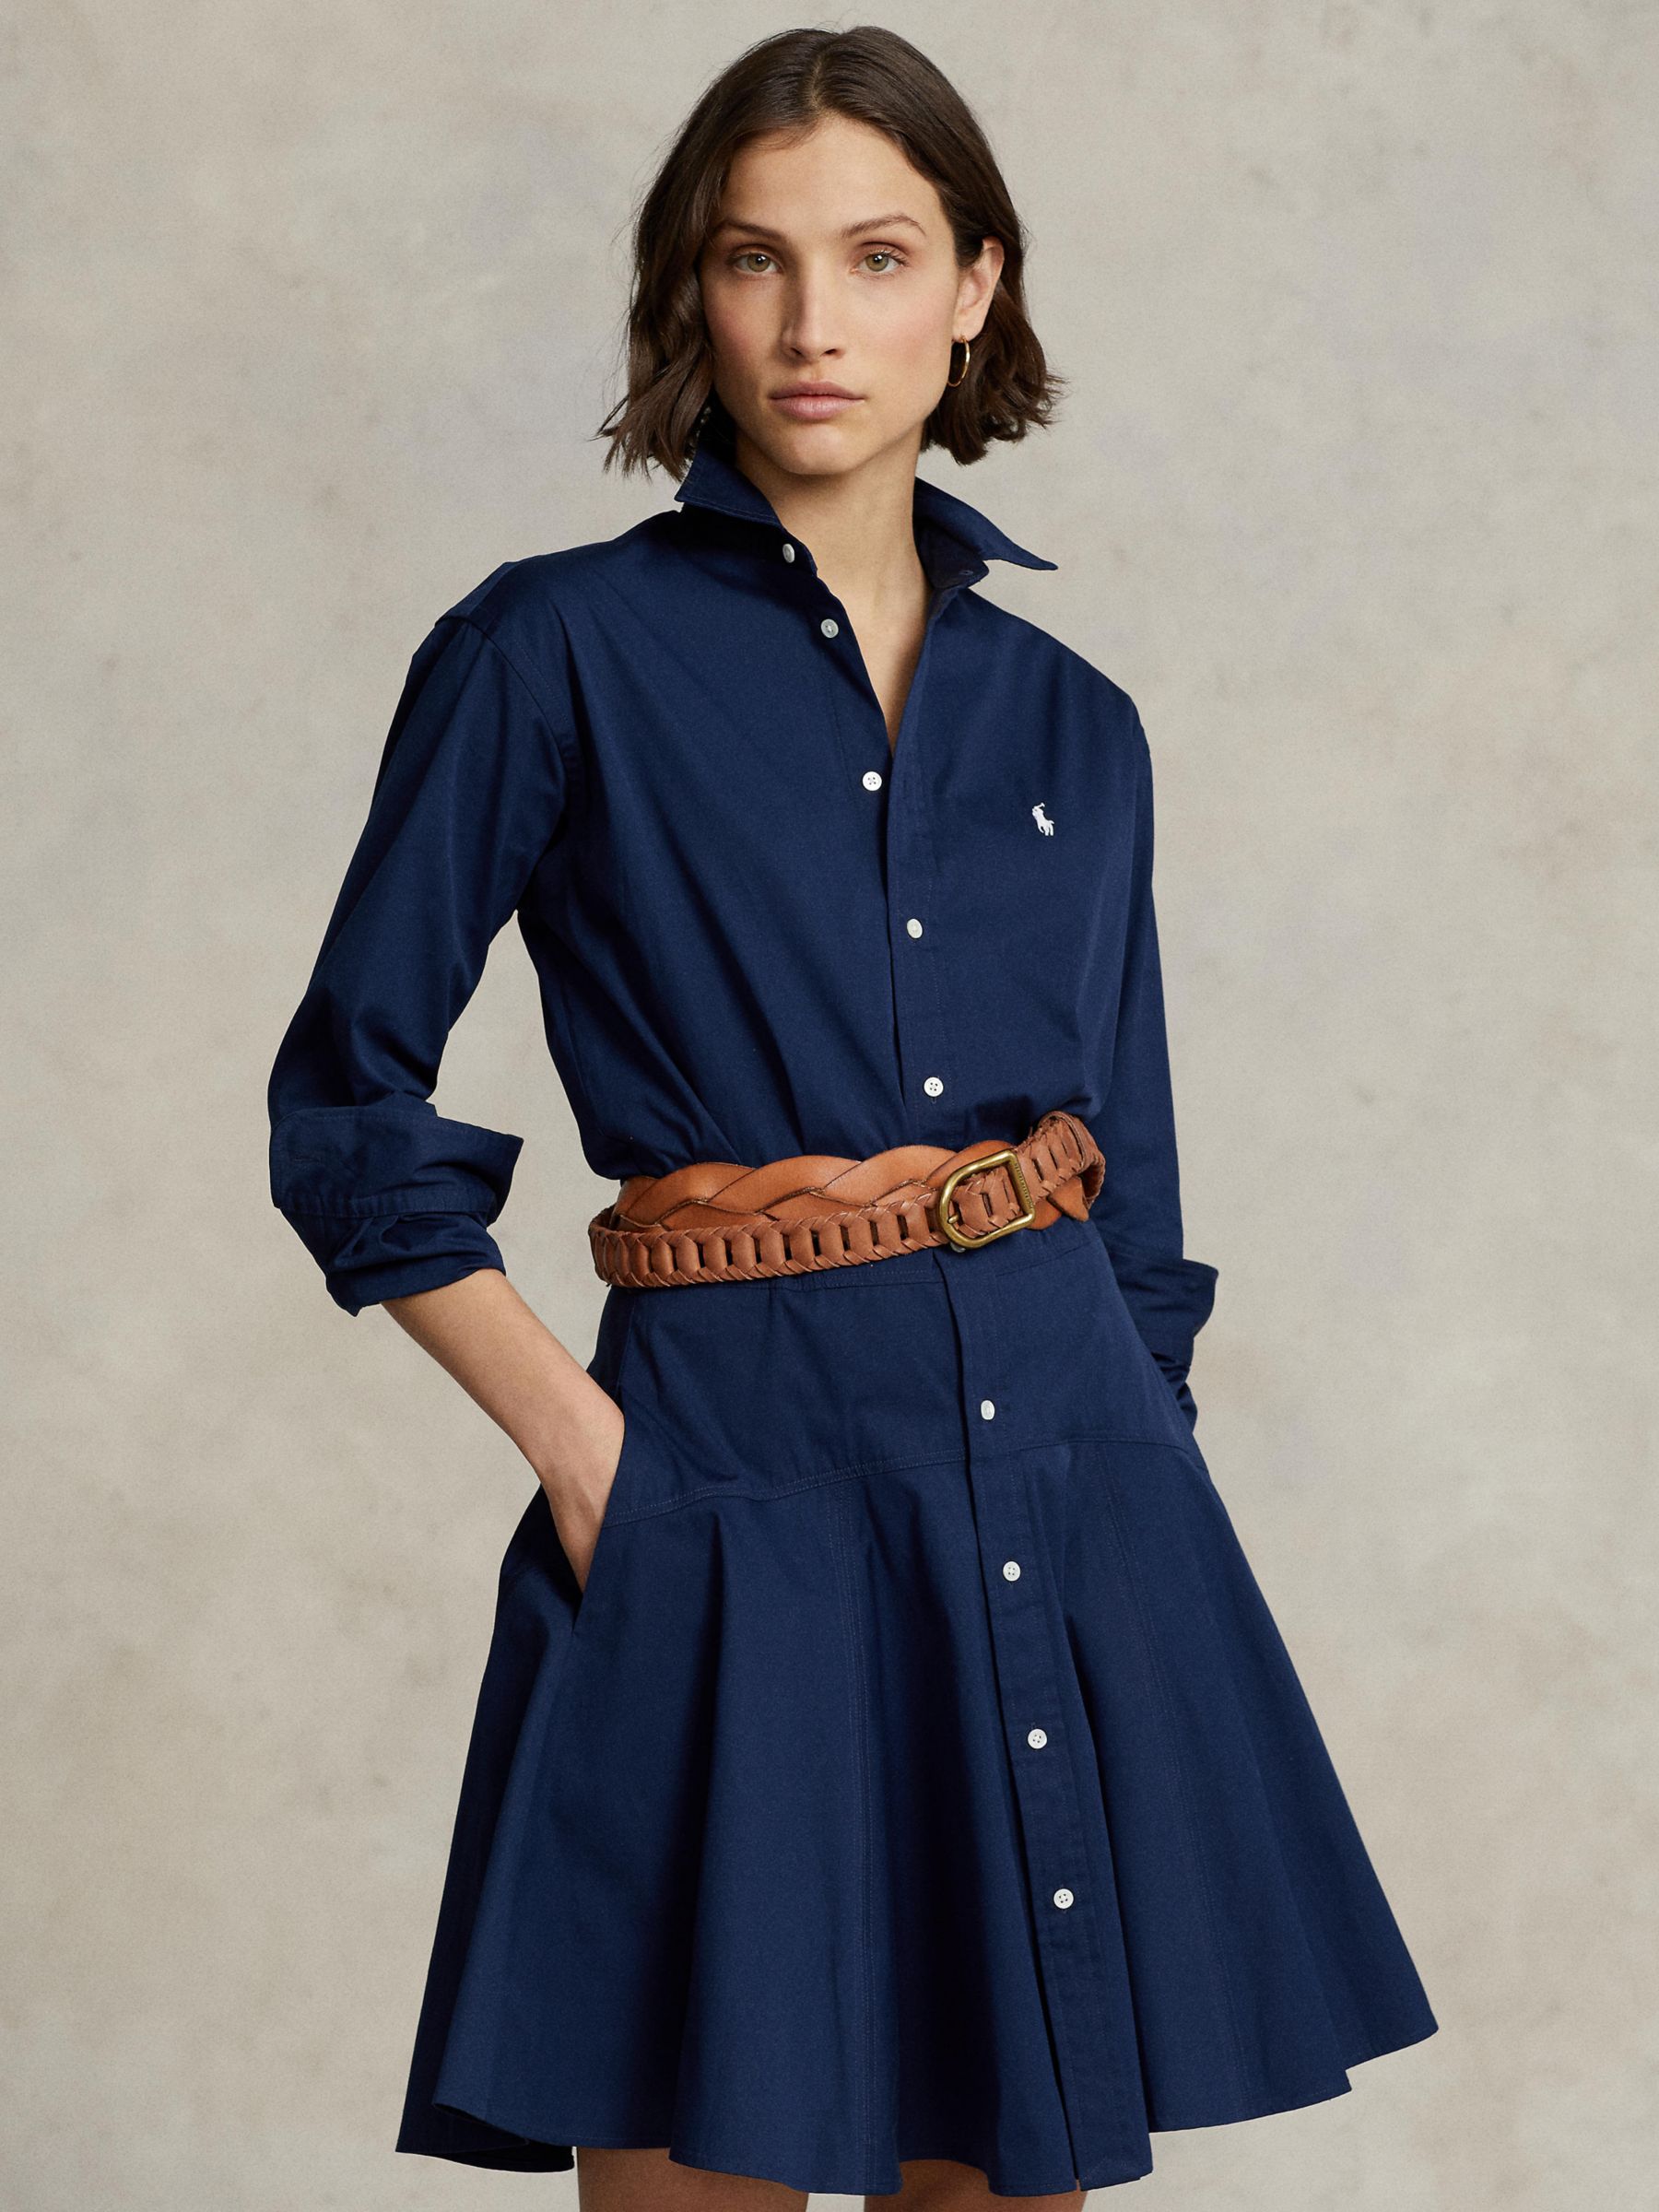 Ralph Lauren's 7 Most Iconic Women's Dresses and Shirtdresses